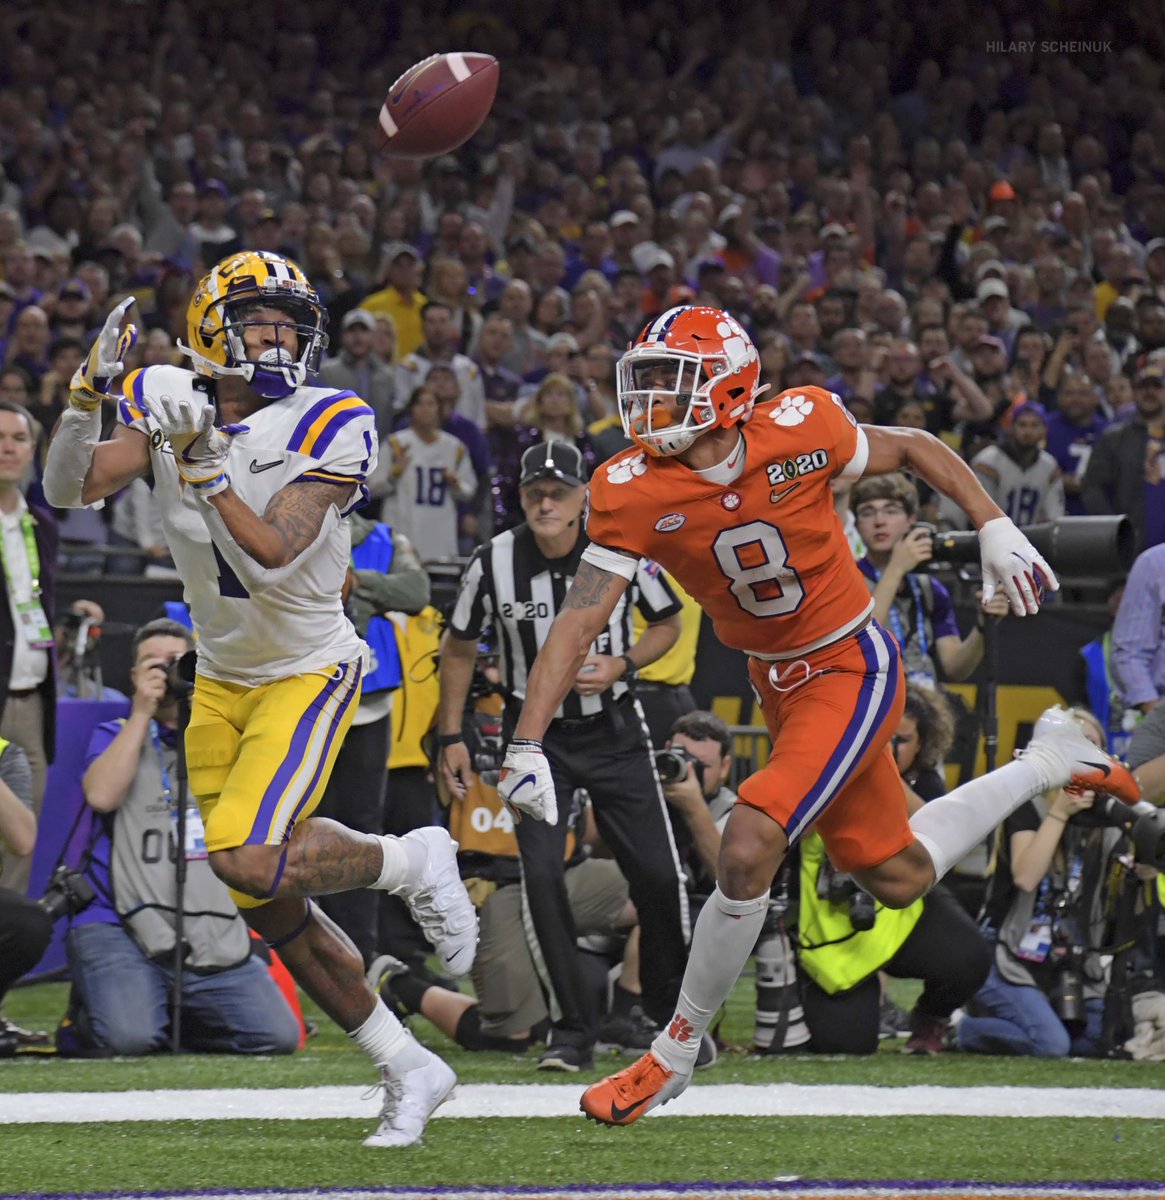 One year ago today, #LSU topped off a perfect season of college football by winning the #NationalChampionship in New Orleans. Relive the Magic: bit.ly/2LngkwG